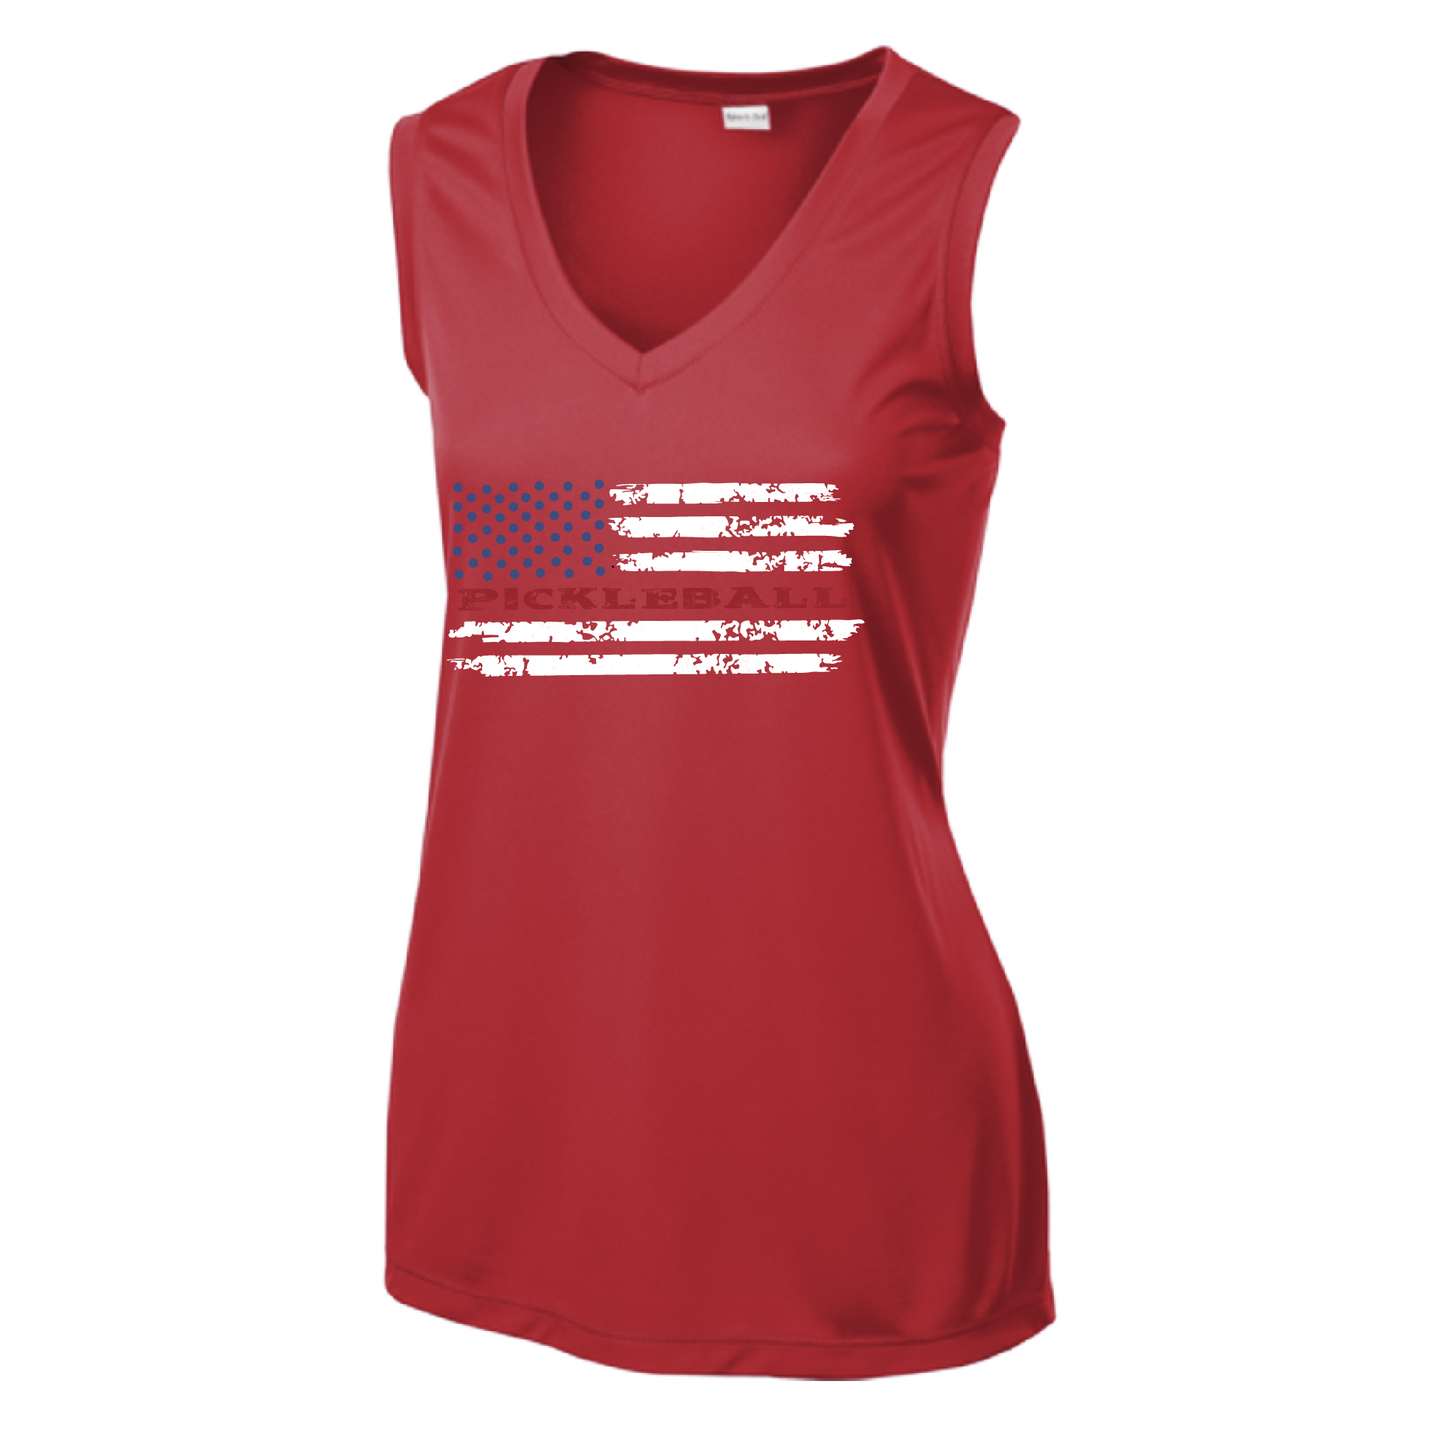 Pickleball Design: Pickleball Flag Horizontal on Front or Back of Shirt  Women's Style: Sleeveless Tank  Turn up the volume in this Women's shirt with its perfect mix of softness and attitude. Material is ultra-comfortable with moisture wicking properties and tri-blend softness. PosiCharge technology locks in color. Highly breathable and lightweight.